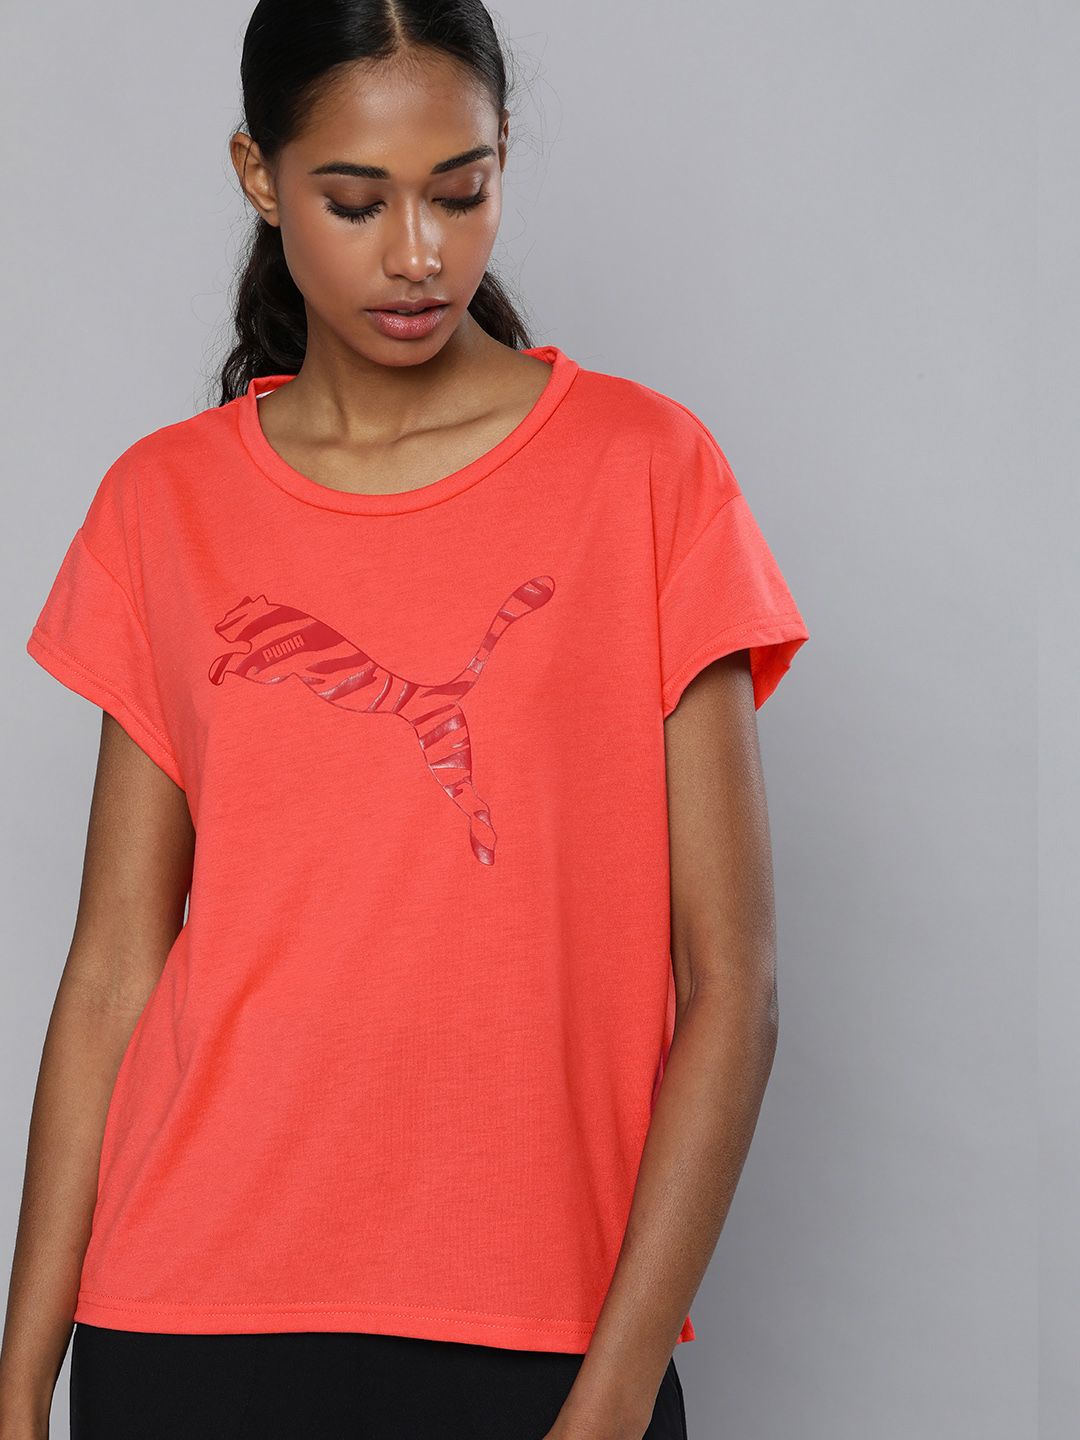 Puma Women Pink Brand Logo Modern Sports dryCELL Printed T-shirt Price in India